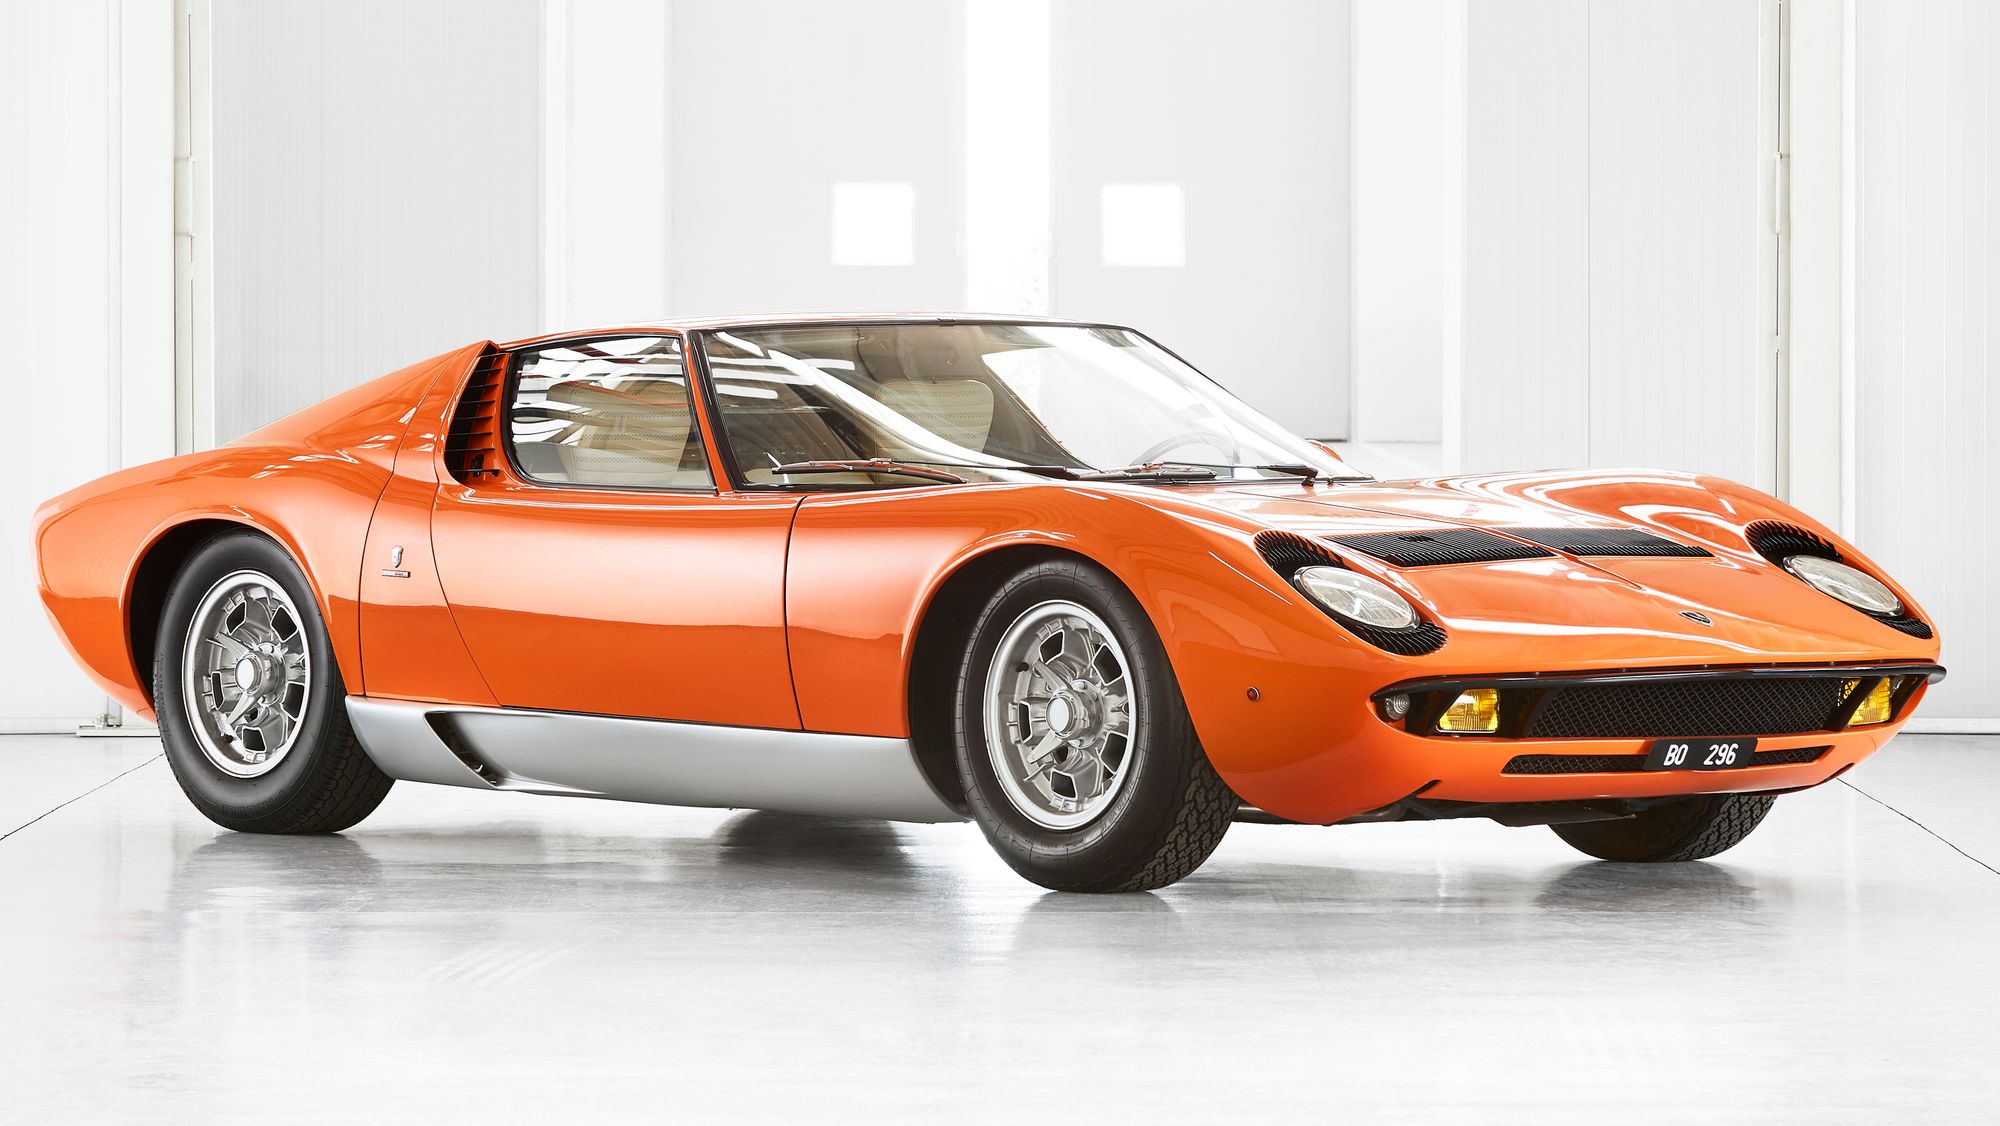 Study Claims World’s Best Classic Car Is A Miura